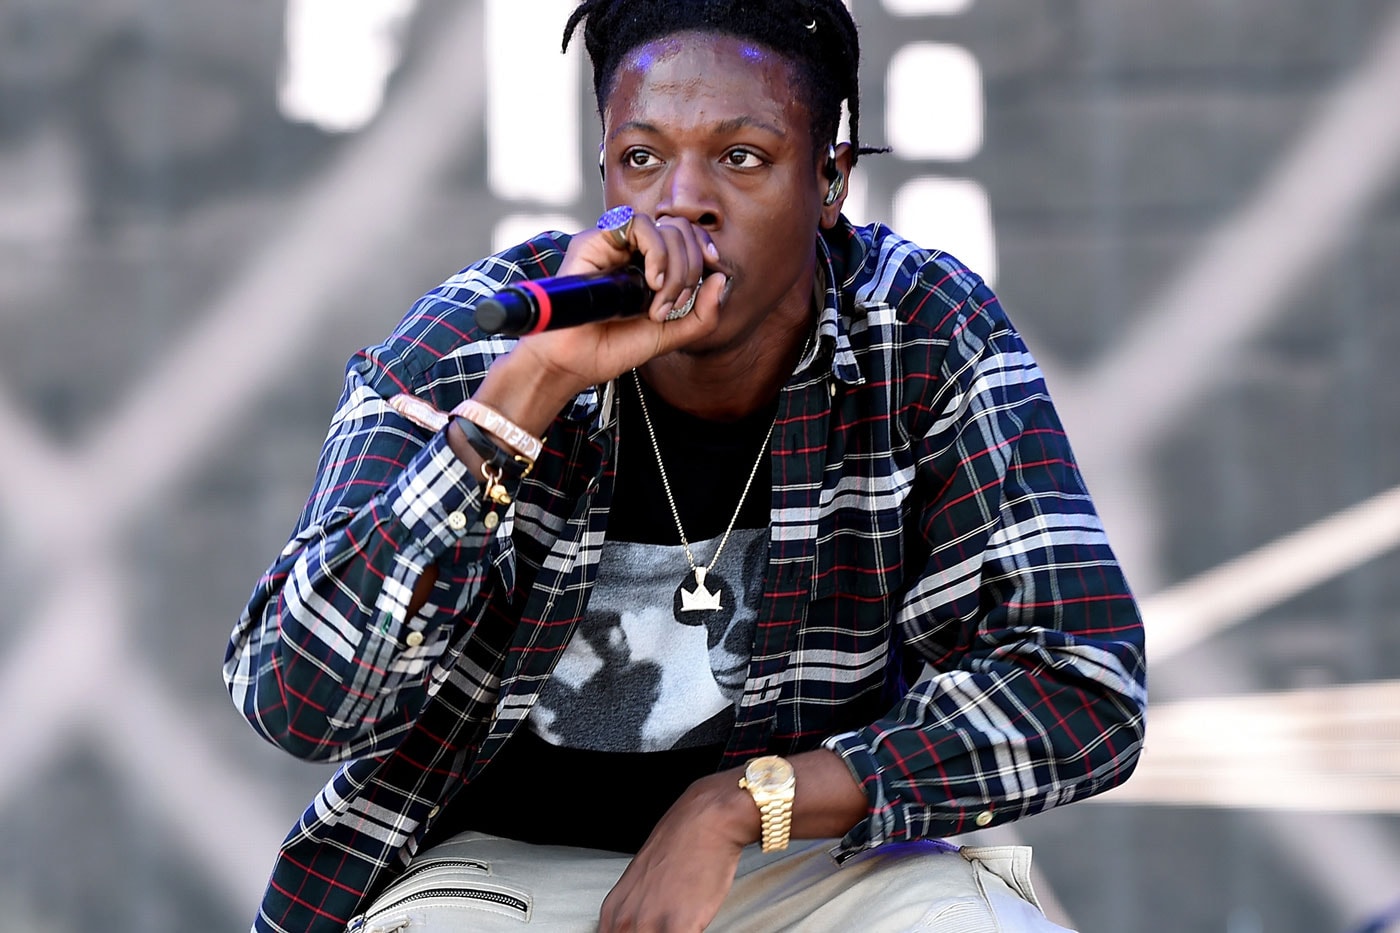 Joey Bada$$ Gives Update on Upcoming Album 'A.A.B.A.' Hip Hop Rap Front and Center Devastated